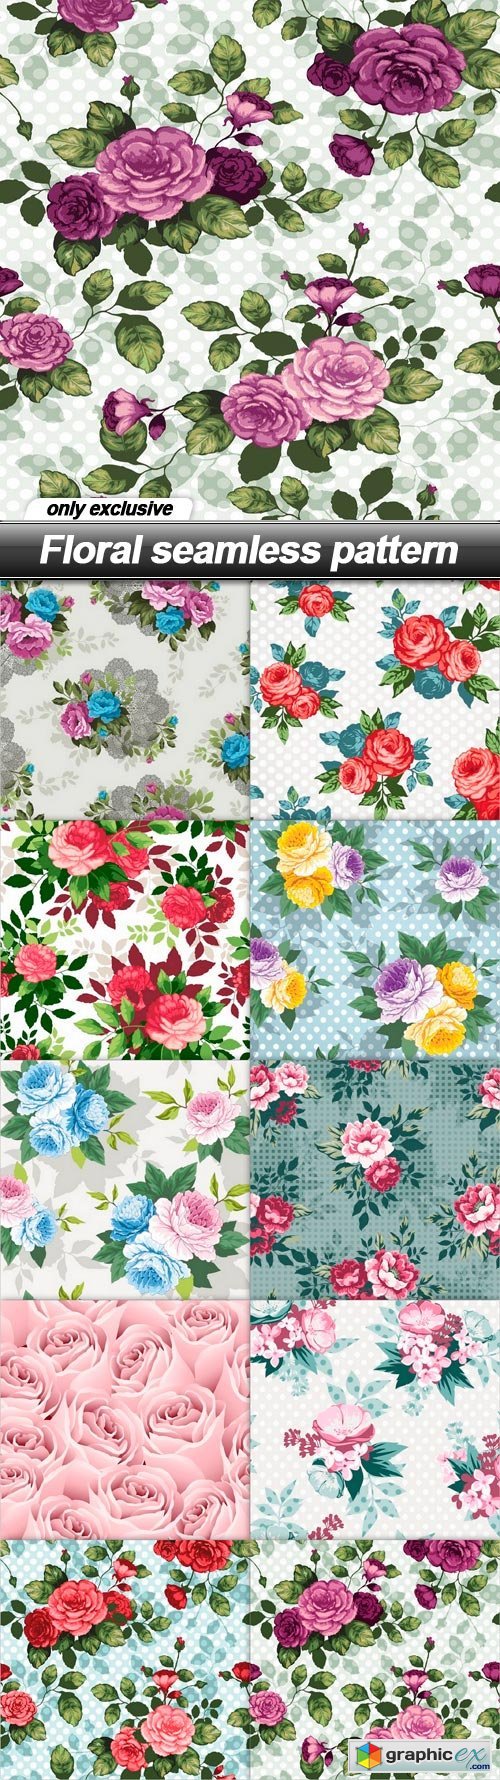 Floral seamless pattern - 10 EPS